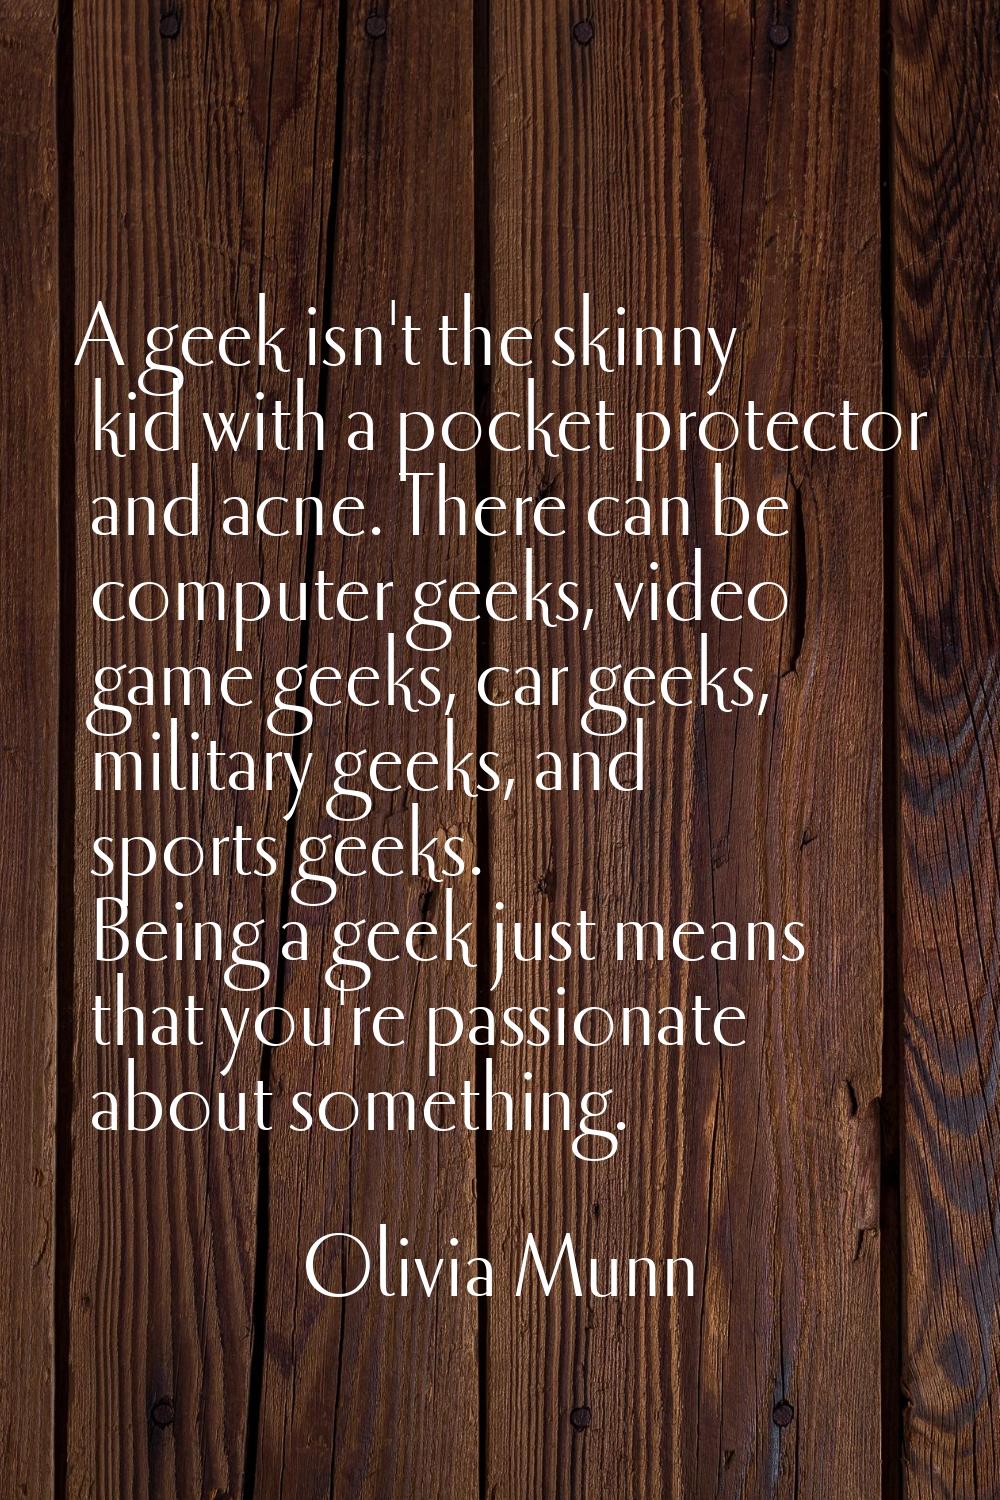 A geek isn't the skinny kid with a pocket protector and acne. There can be computer geeks, video ga